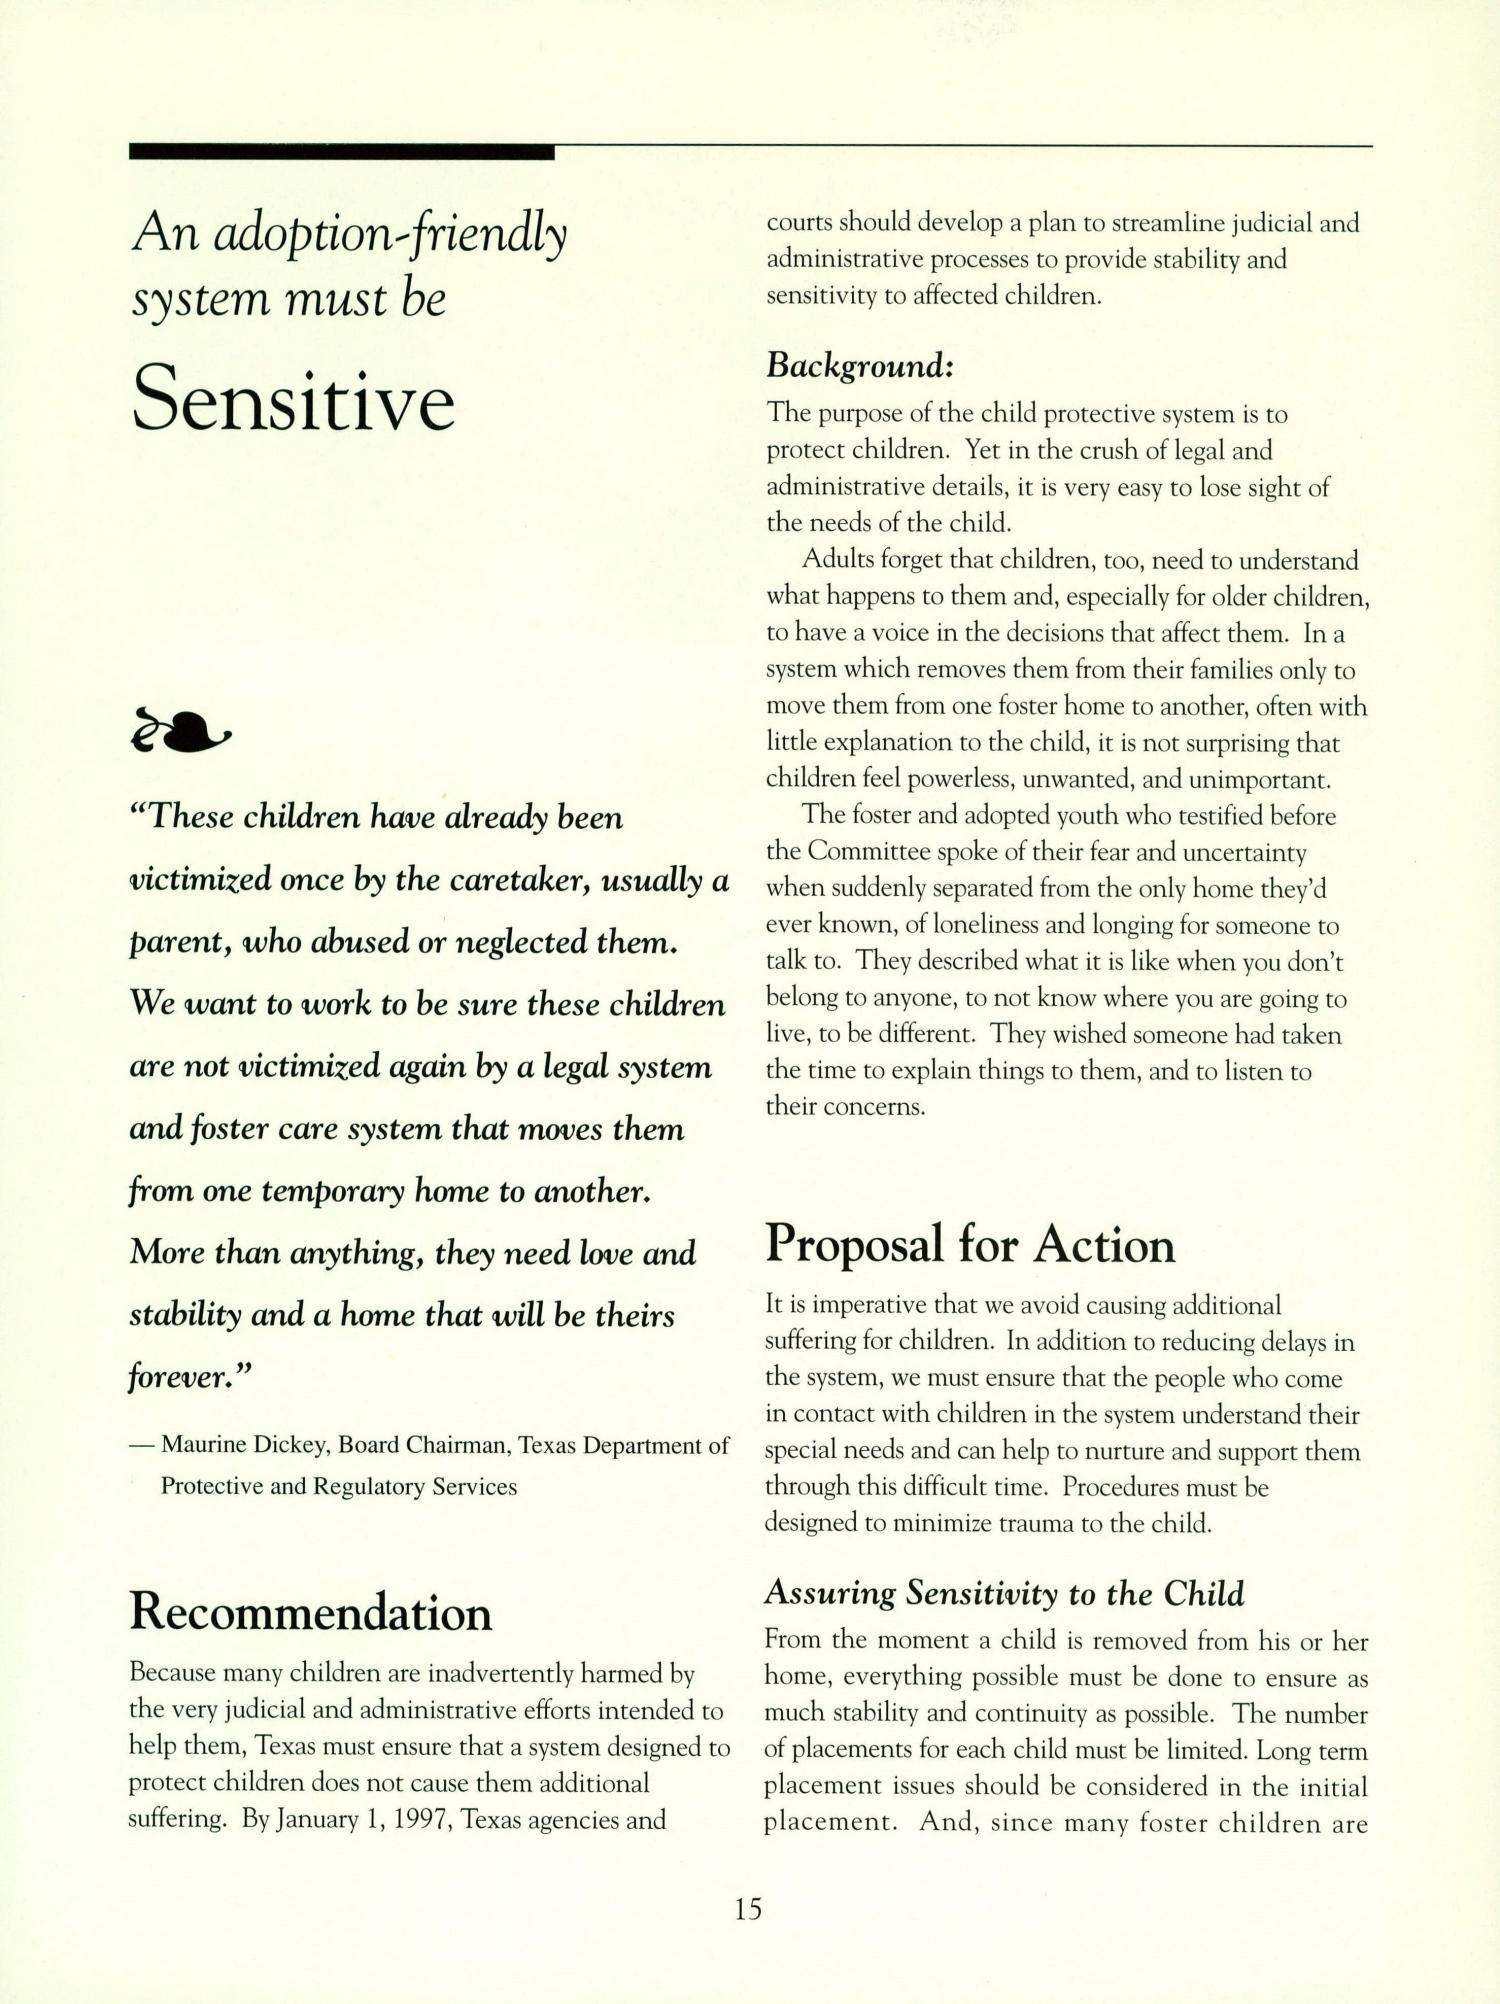 Report of the Governor's Committee to Promote Adoption
                                                
                                                    15
                                                